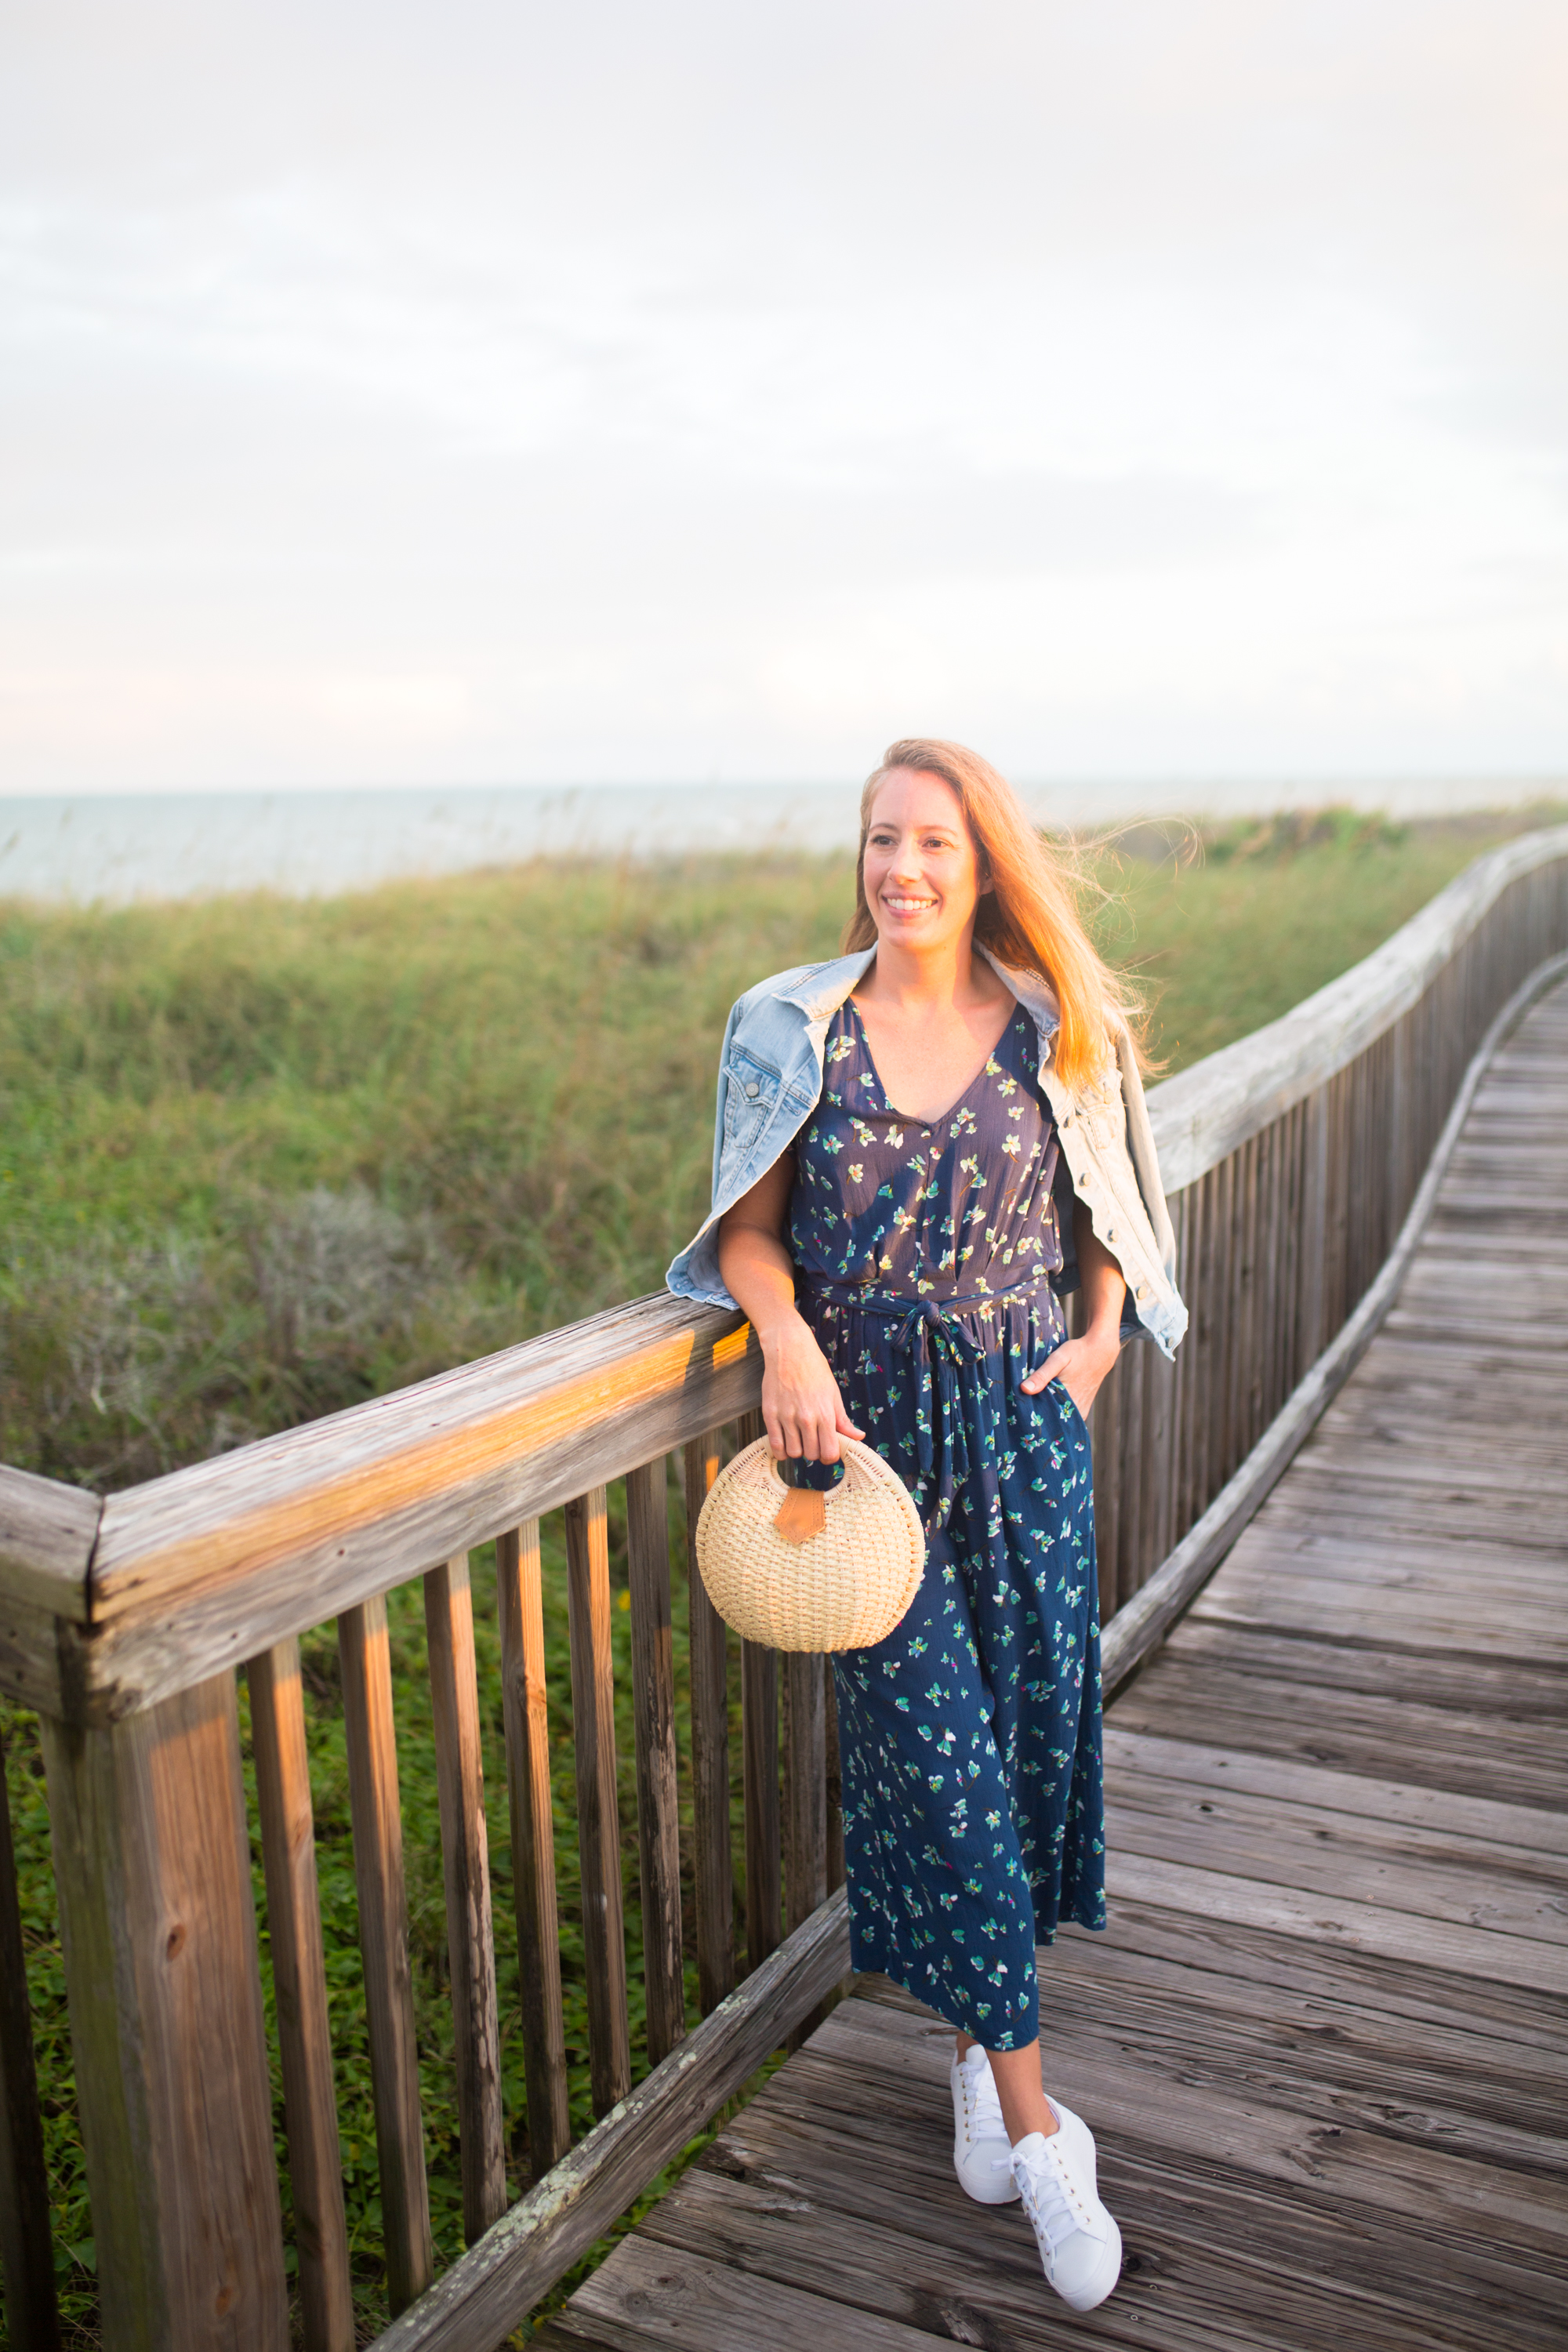 What to Wear on a Tropical Winter Getaway / Blue Floral Jumpsuit / Beach Resort Outfits / Resort Vacation Outfits / Vacay Outfits / Island Outfits Tropical / Beach Weekend Outfit / White Sneakers Outfit - Sunshine Style, A Florida Based Fashion and Lifestyle Blog